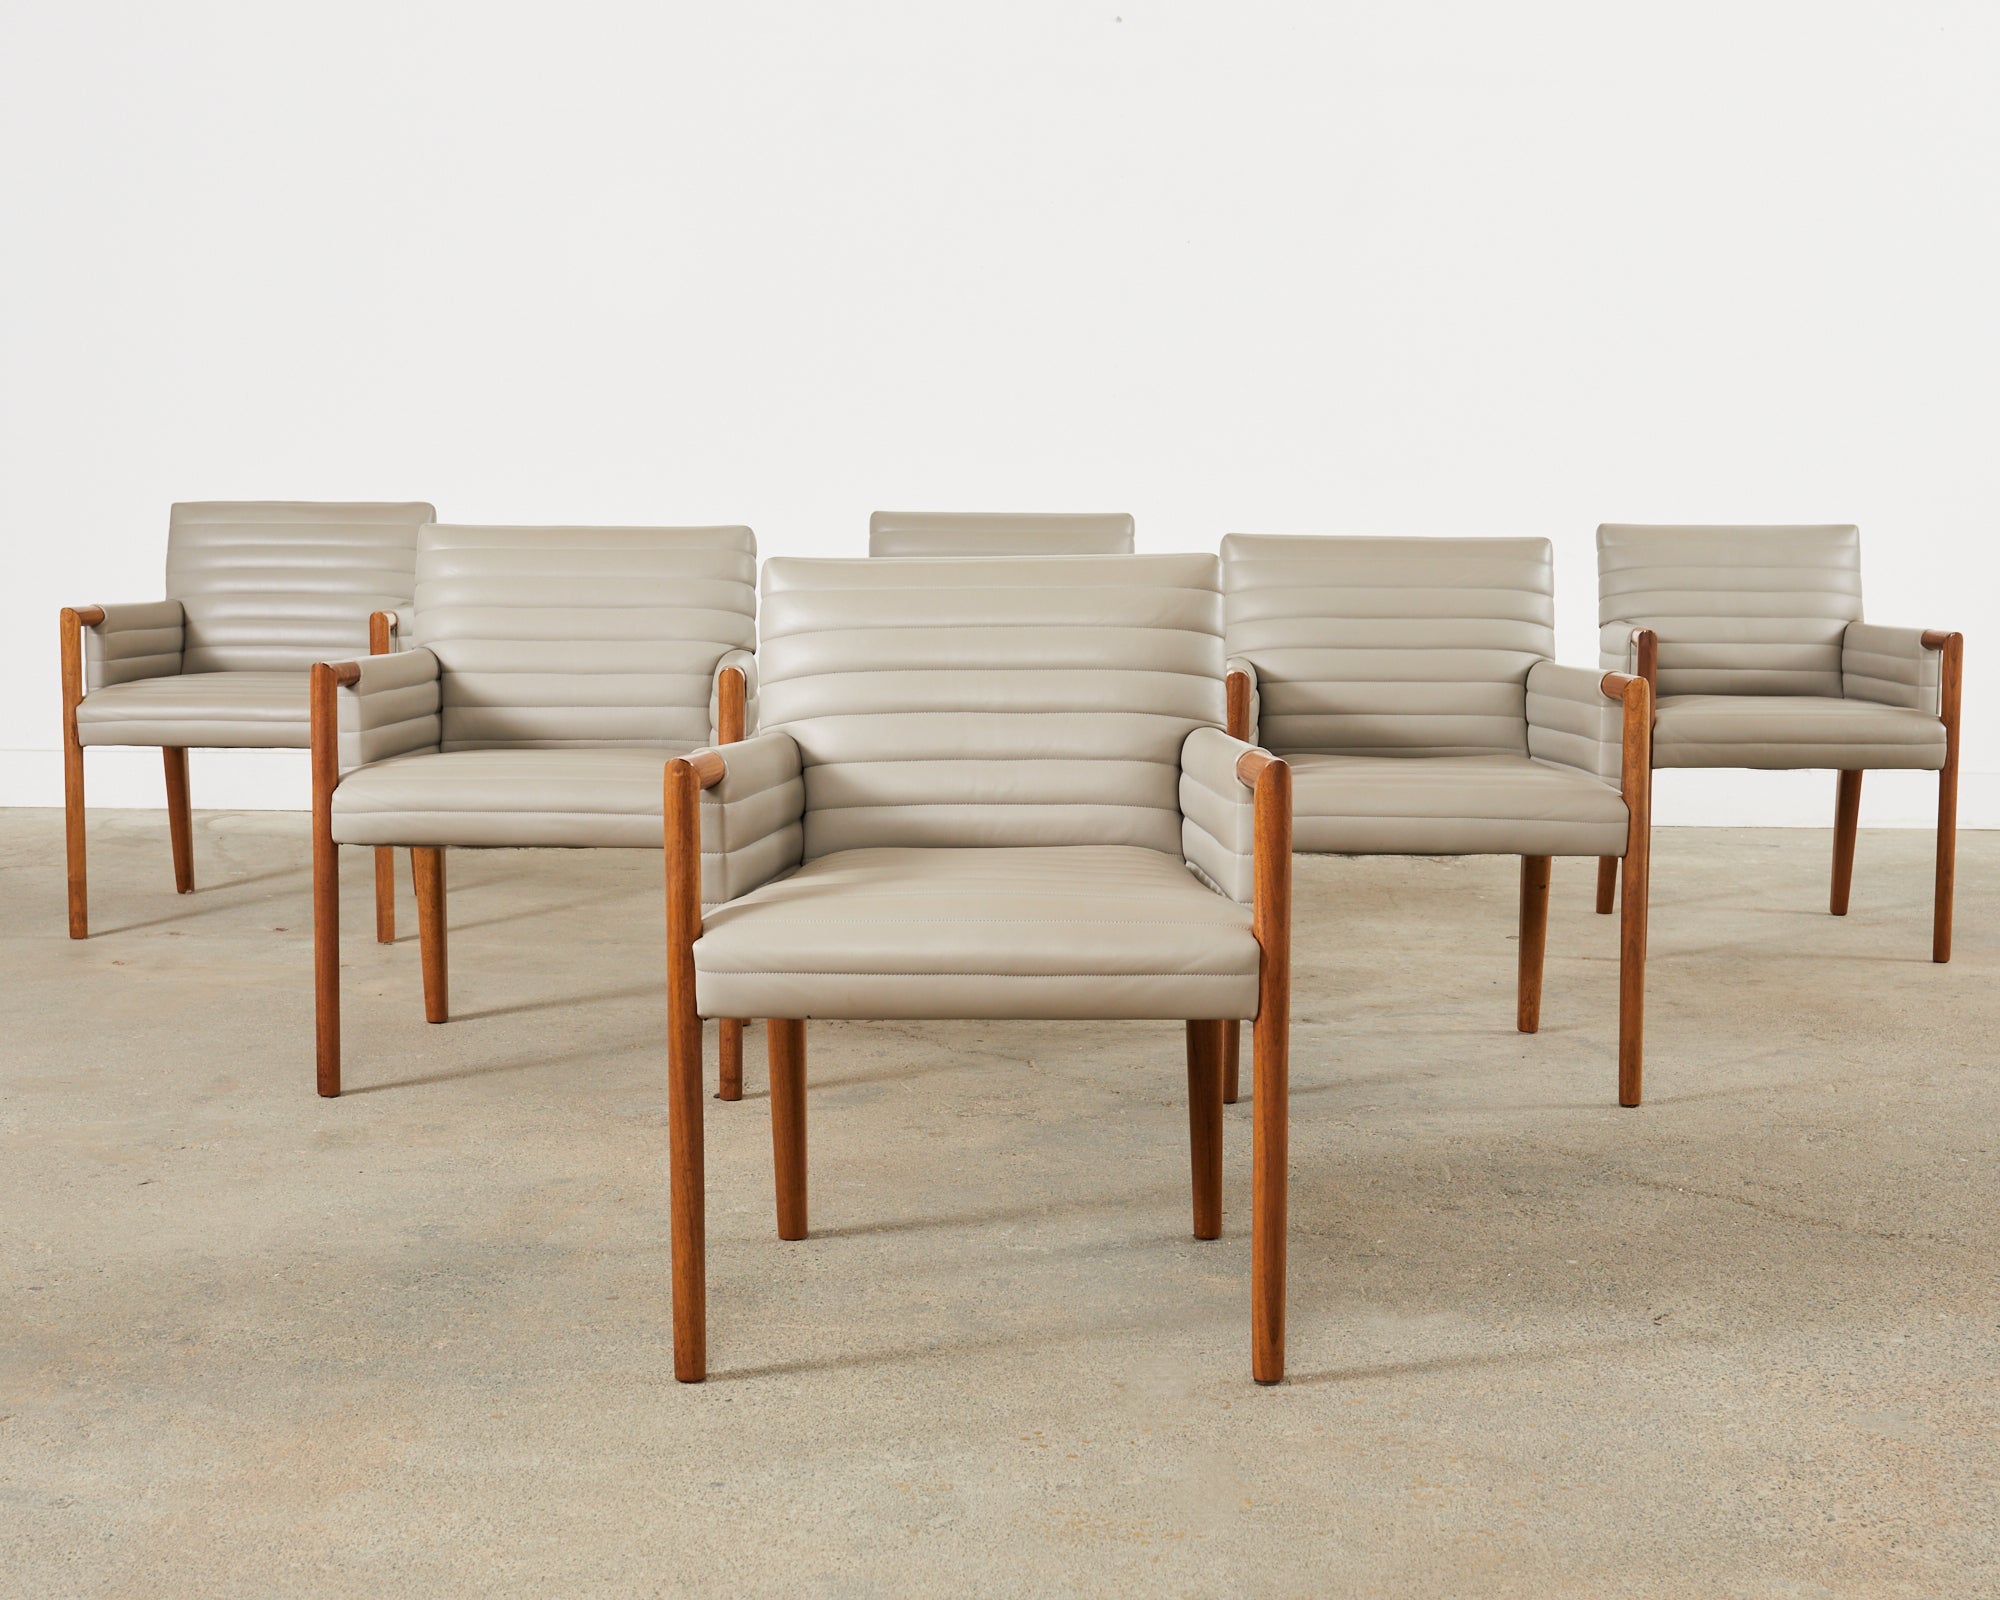 Remarkable set of six dining armchairs designed by Douglas Levine for Bright Chair Company in New York. The Gosha armchair features a thick hardwood frame covered with quilted leather fit like a fine Italian suit. The chairs have an open arm